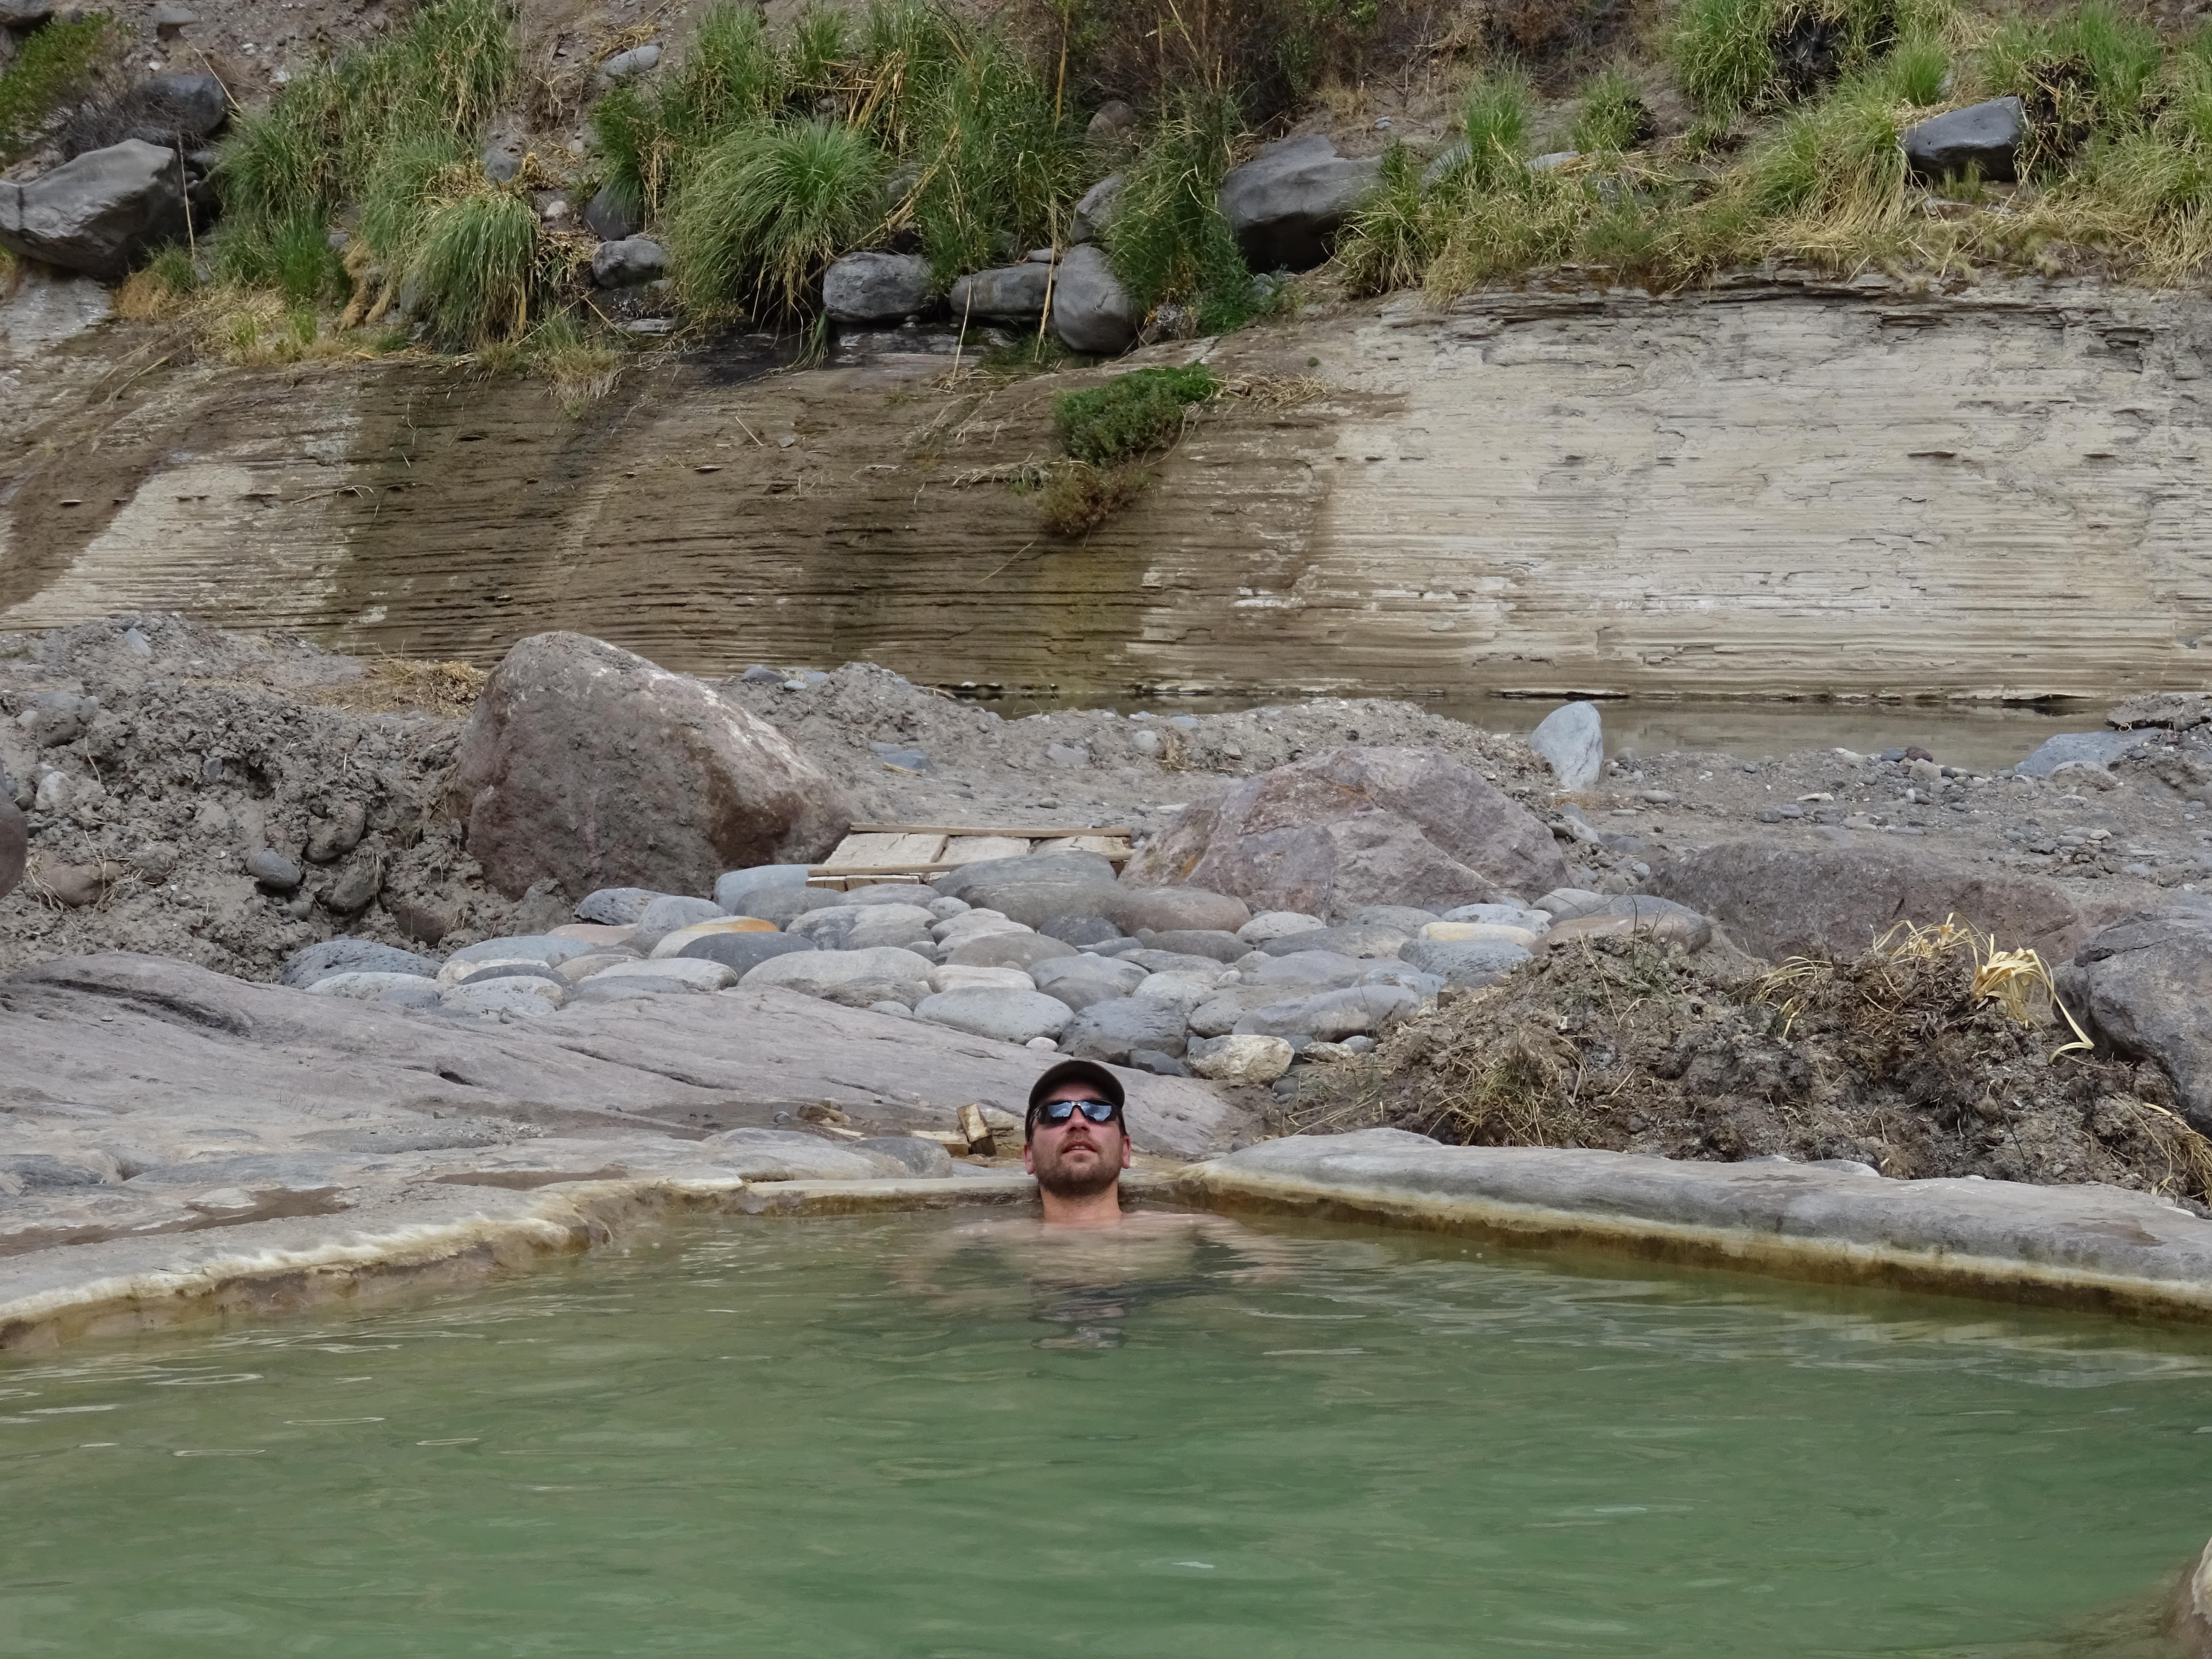 Hot Springs after hike